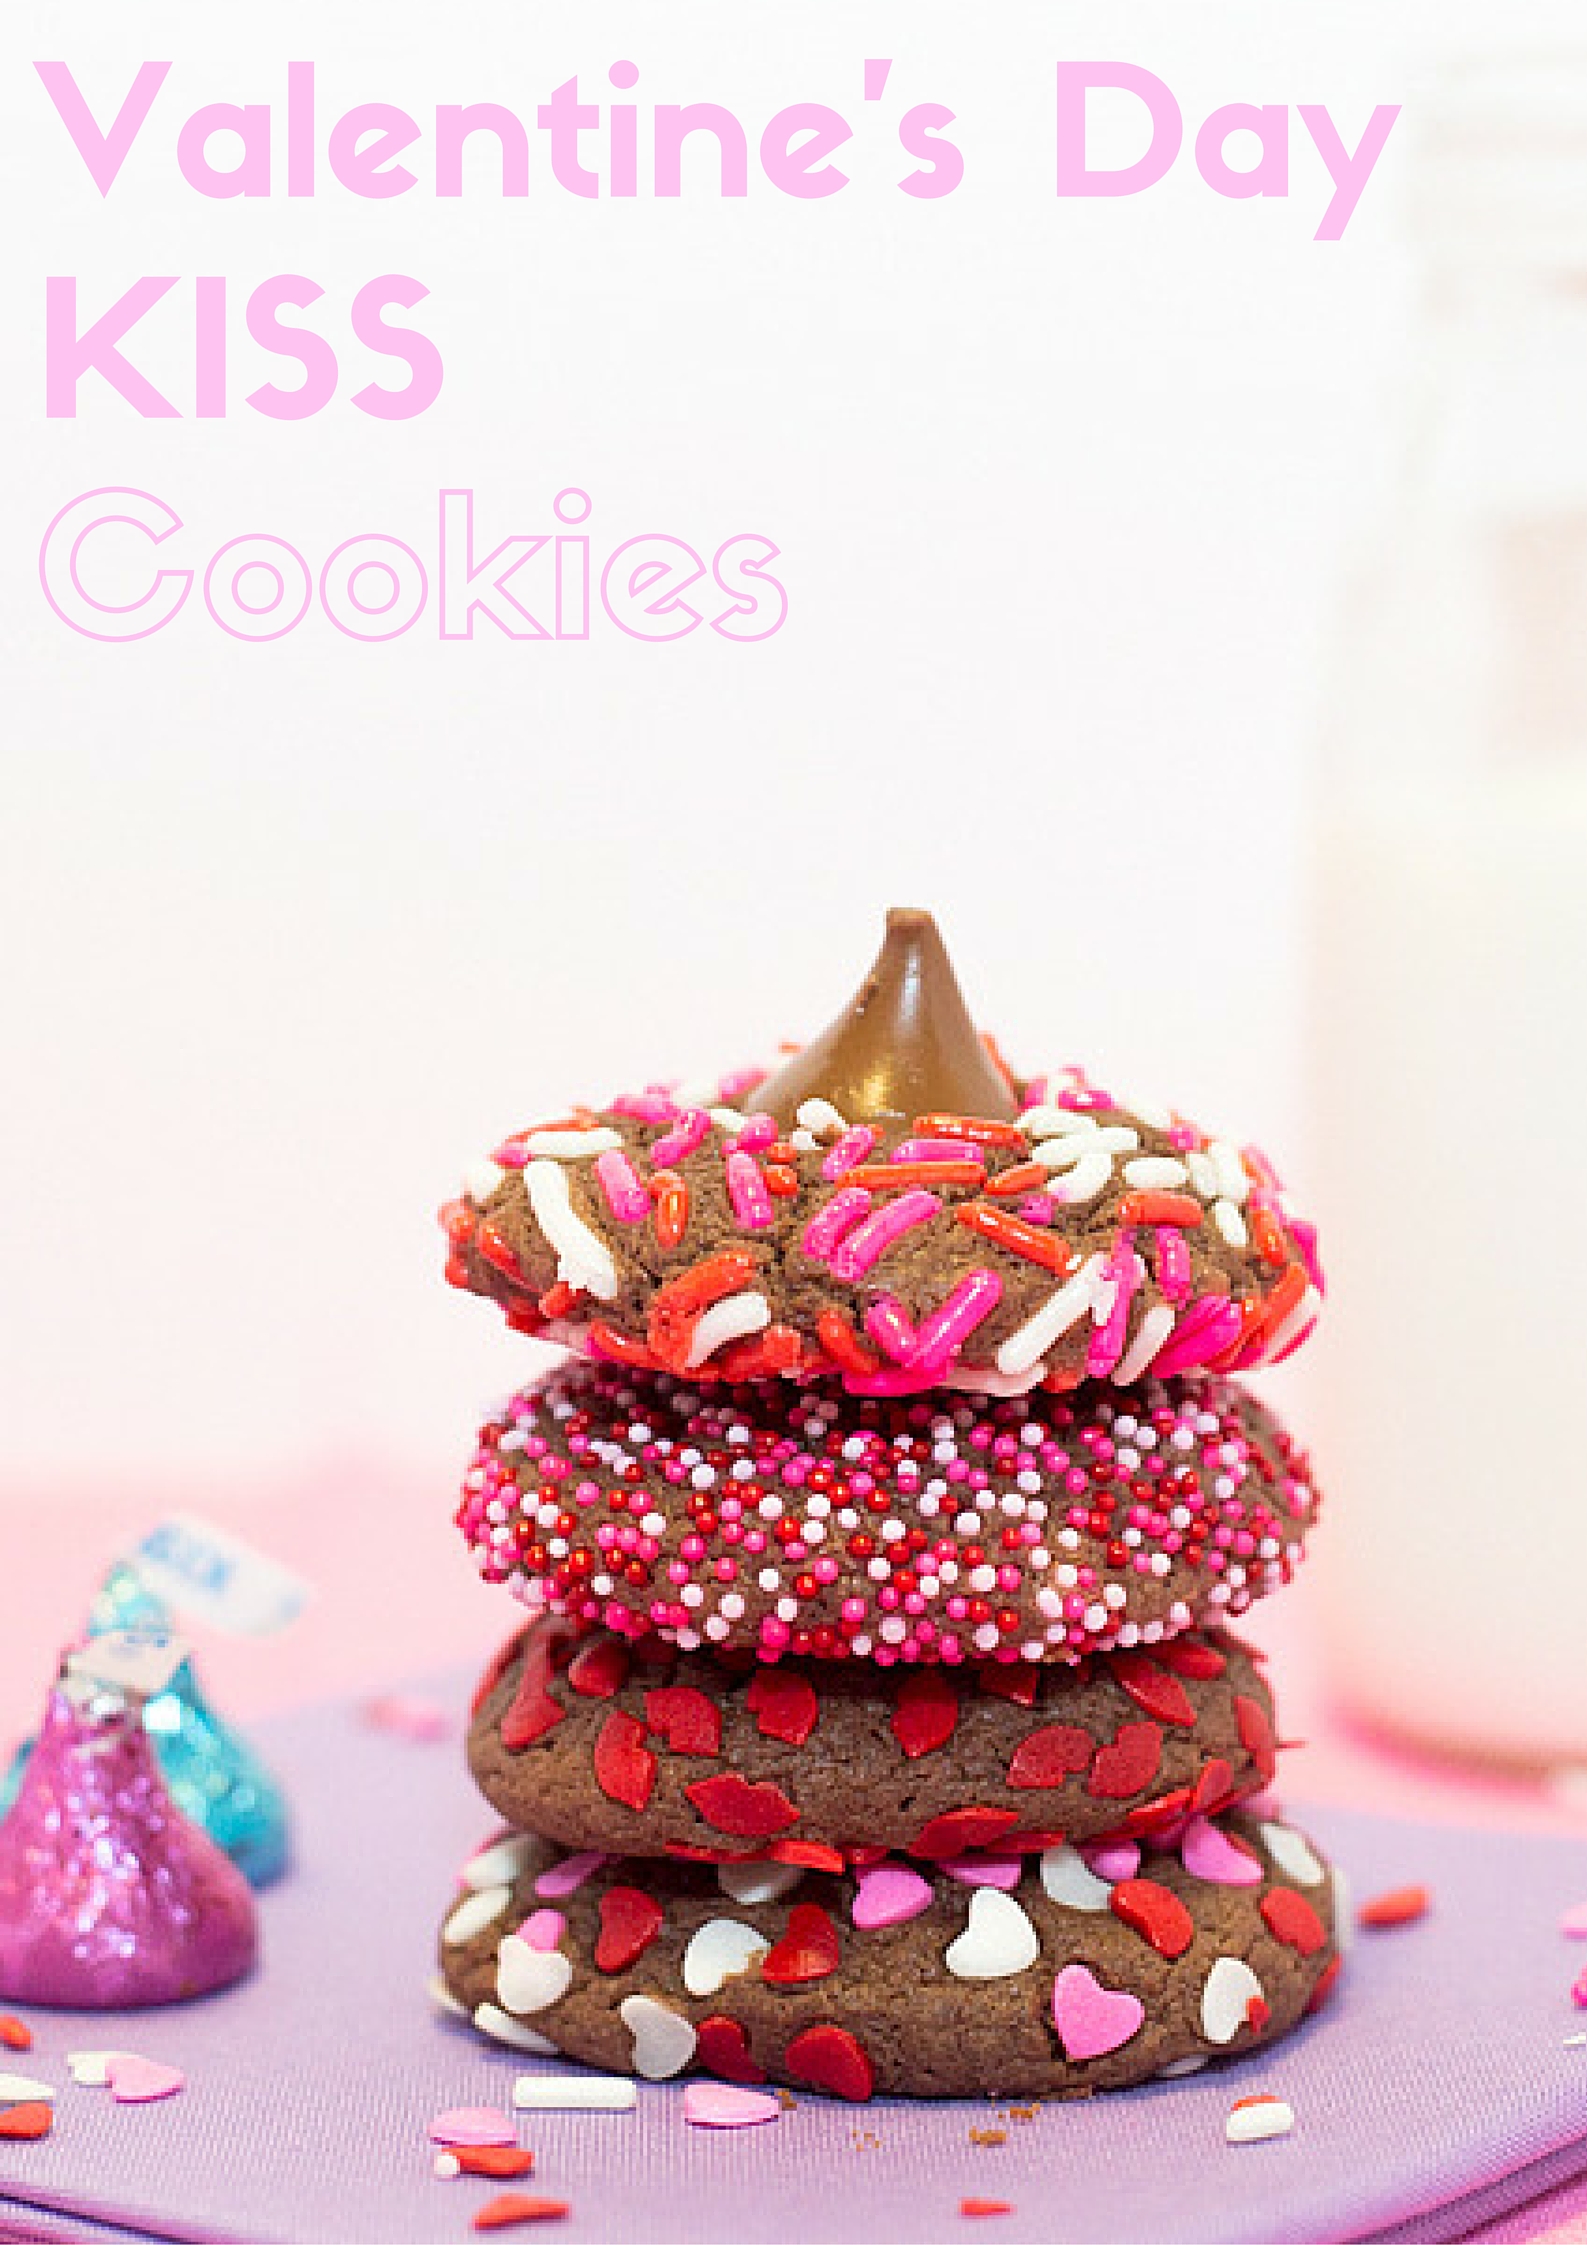 Hershey's Valentine's Day KISS Cookies Recipe #HSYMessageOfLove - The ...